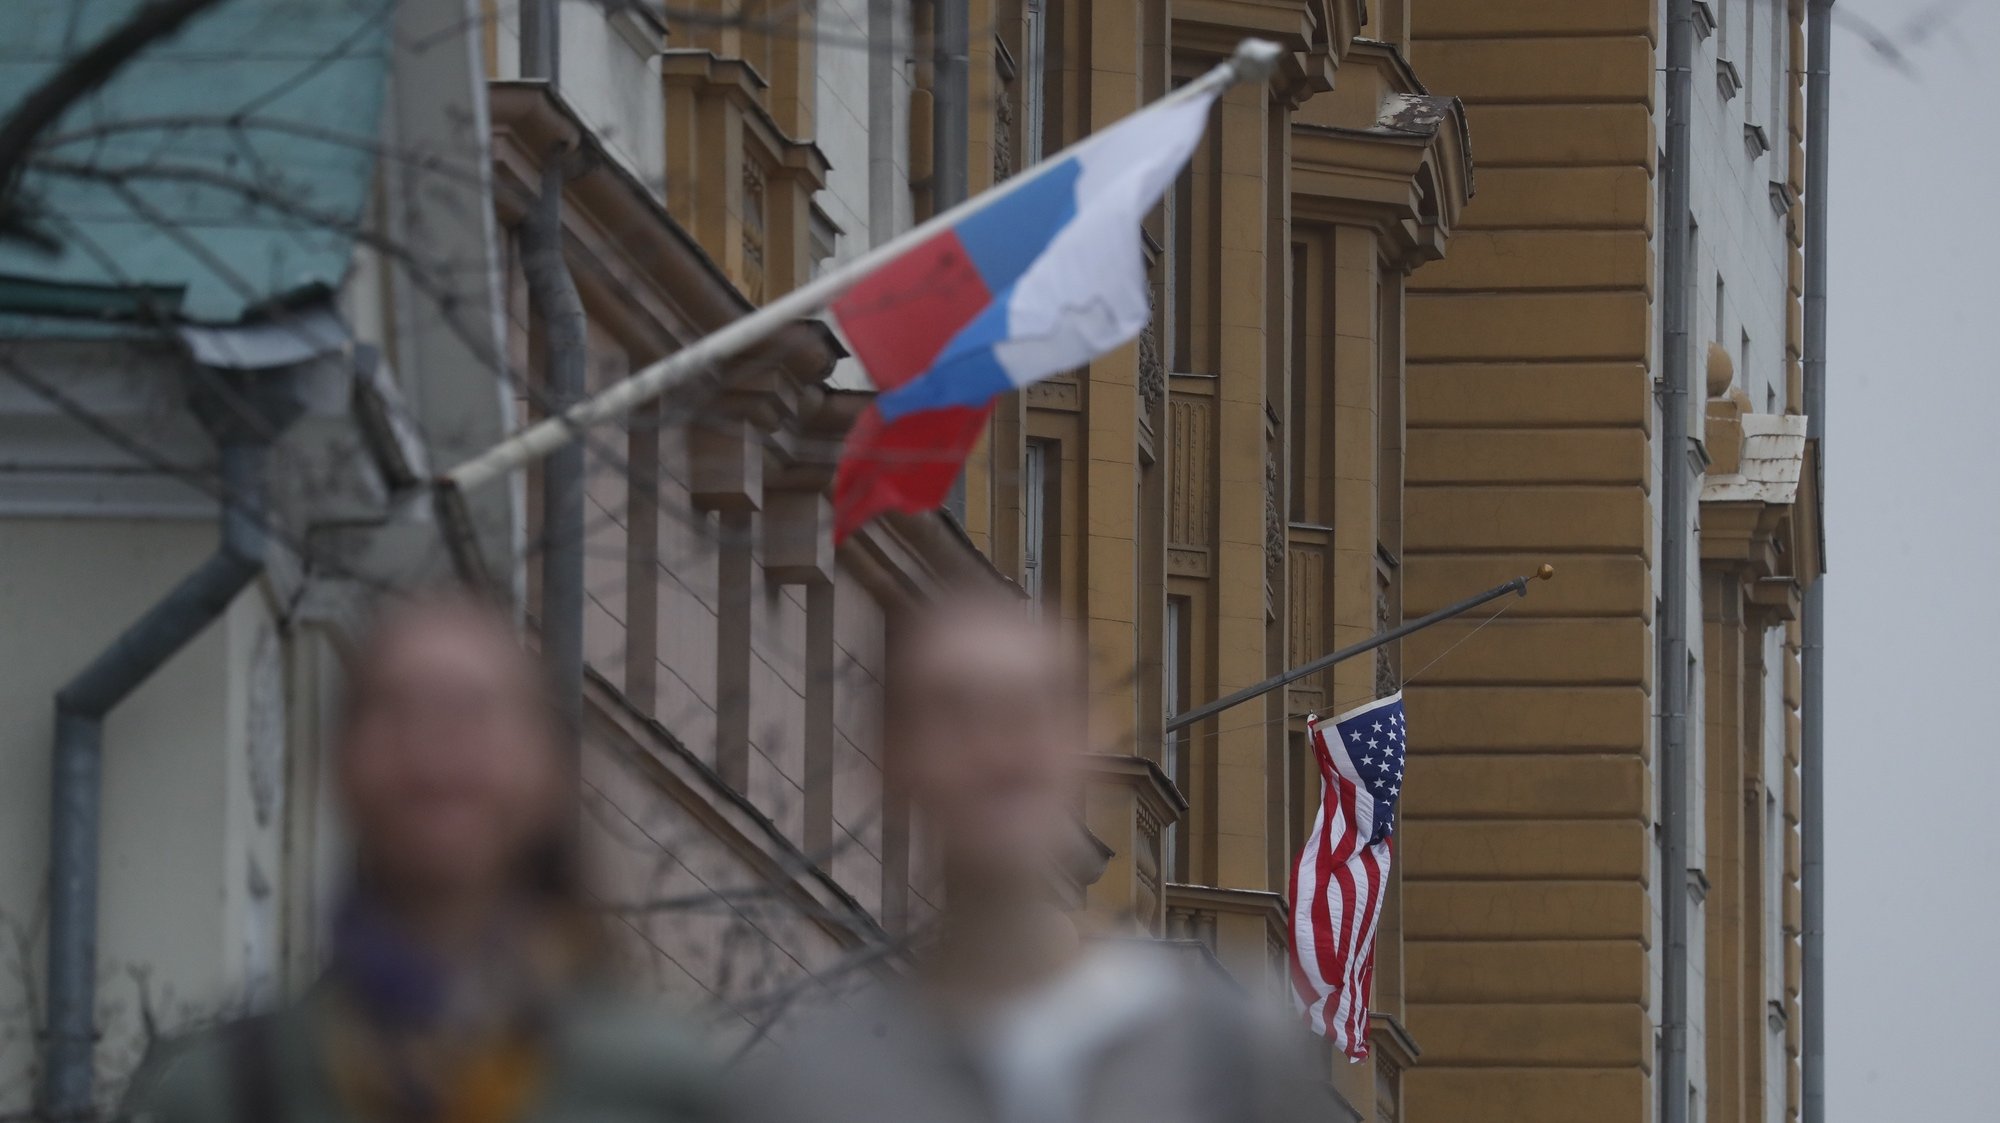 epa09137644 A Russian flag (L) next to the US embassy building in Moscow, Russia, 15 April 2021. Tensions have escalated between the US and Russia following the new sanctions announced by the United States against Russia.  EPA/MAXIM SHIPENKOV